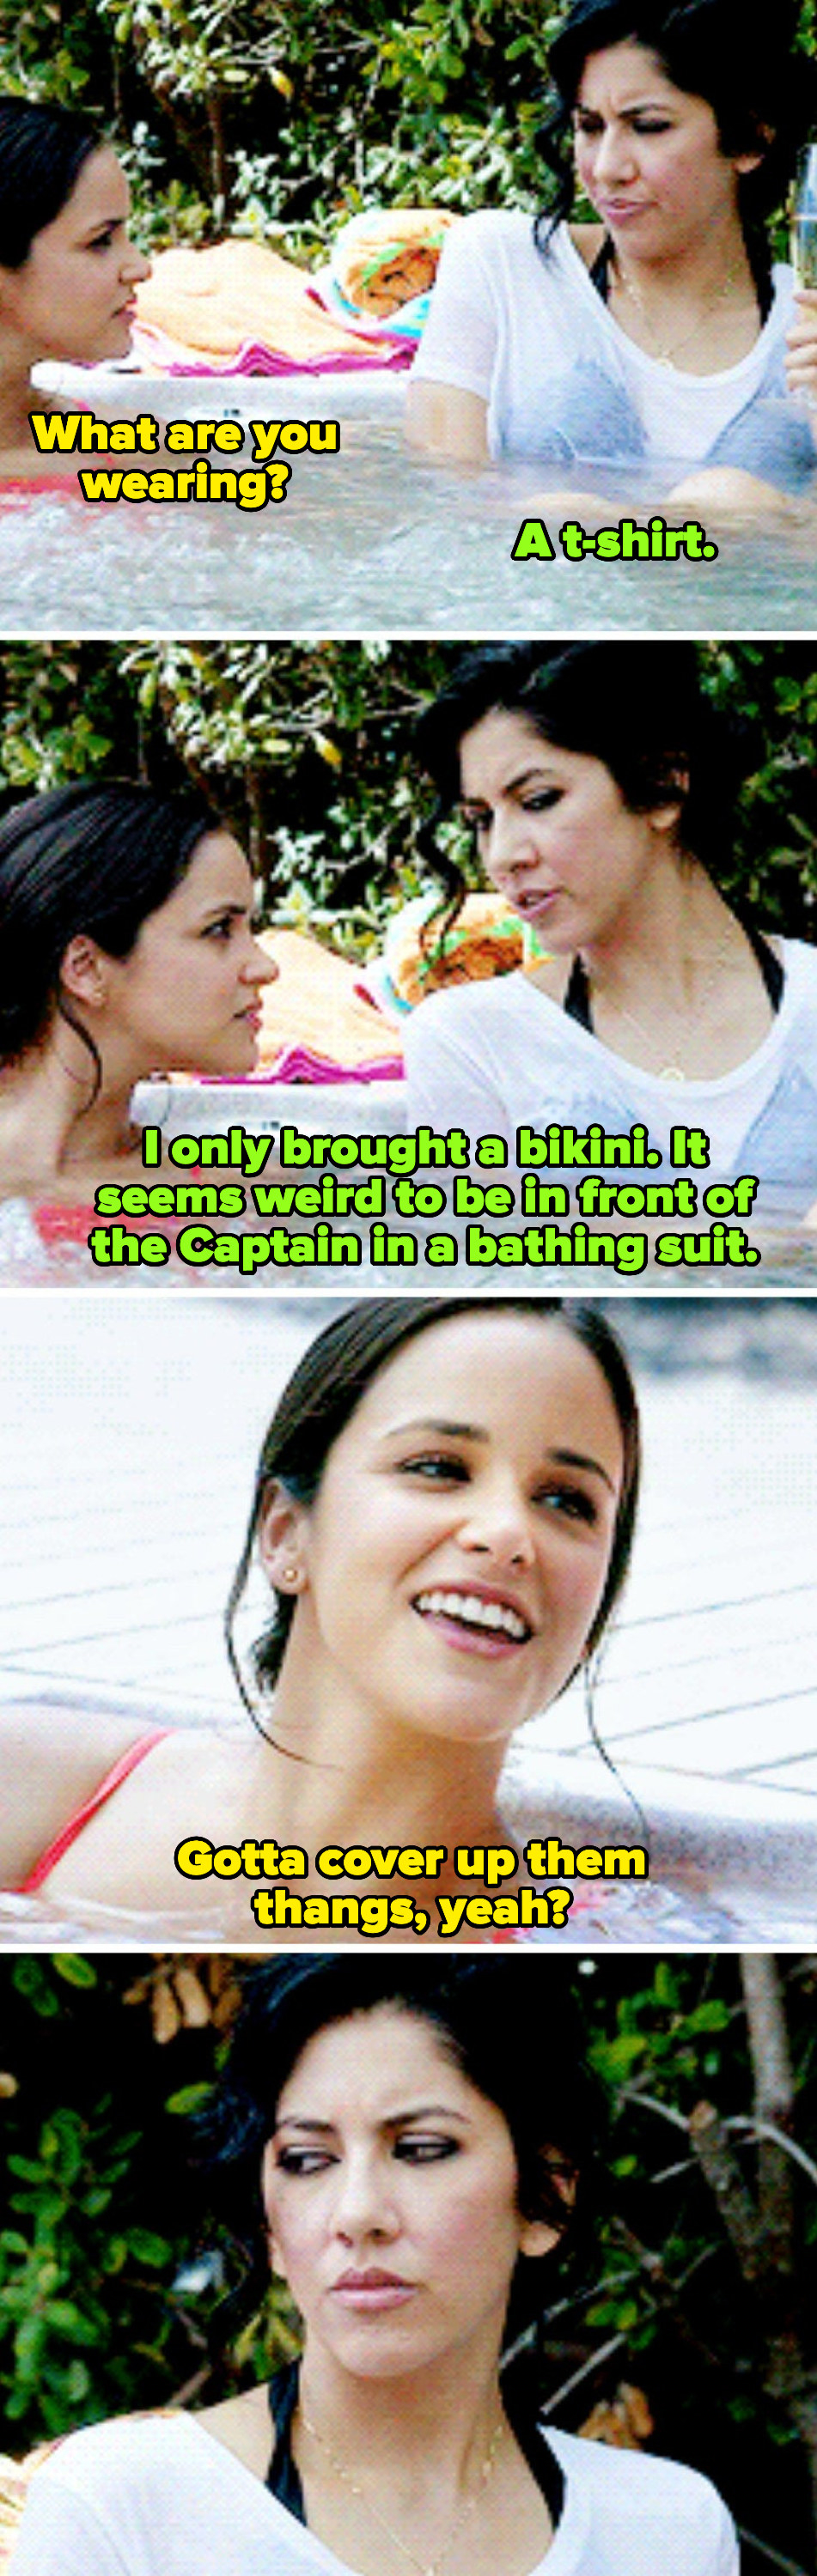 Rosa to Amy: &quot;I only brought a bikini. It seems weird to be in front of the captain wearing a bathing suit.&quot; Drunk Amy to Rosa: &quot;Gotta cover up them thangs, yeah?&quot;